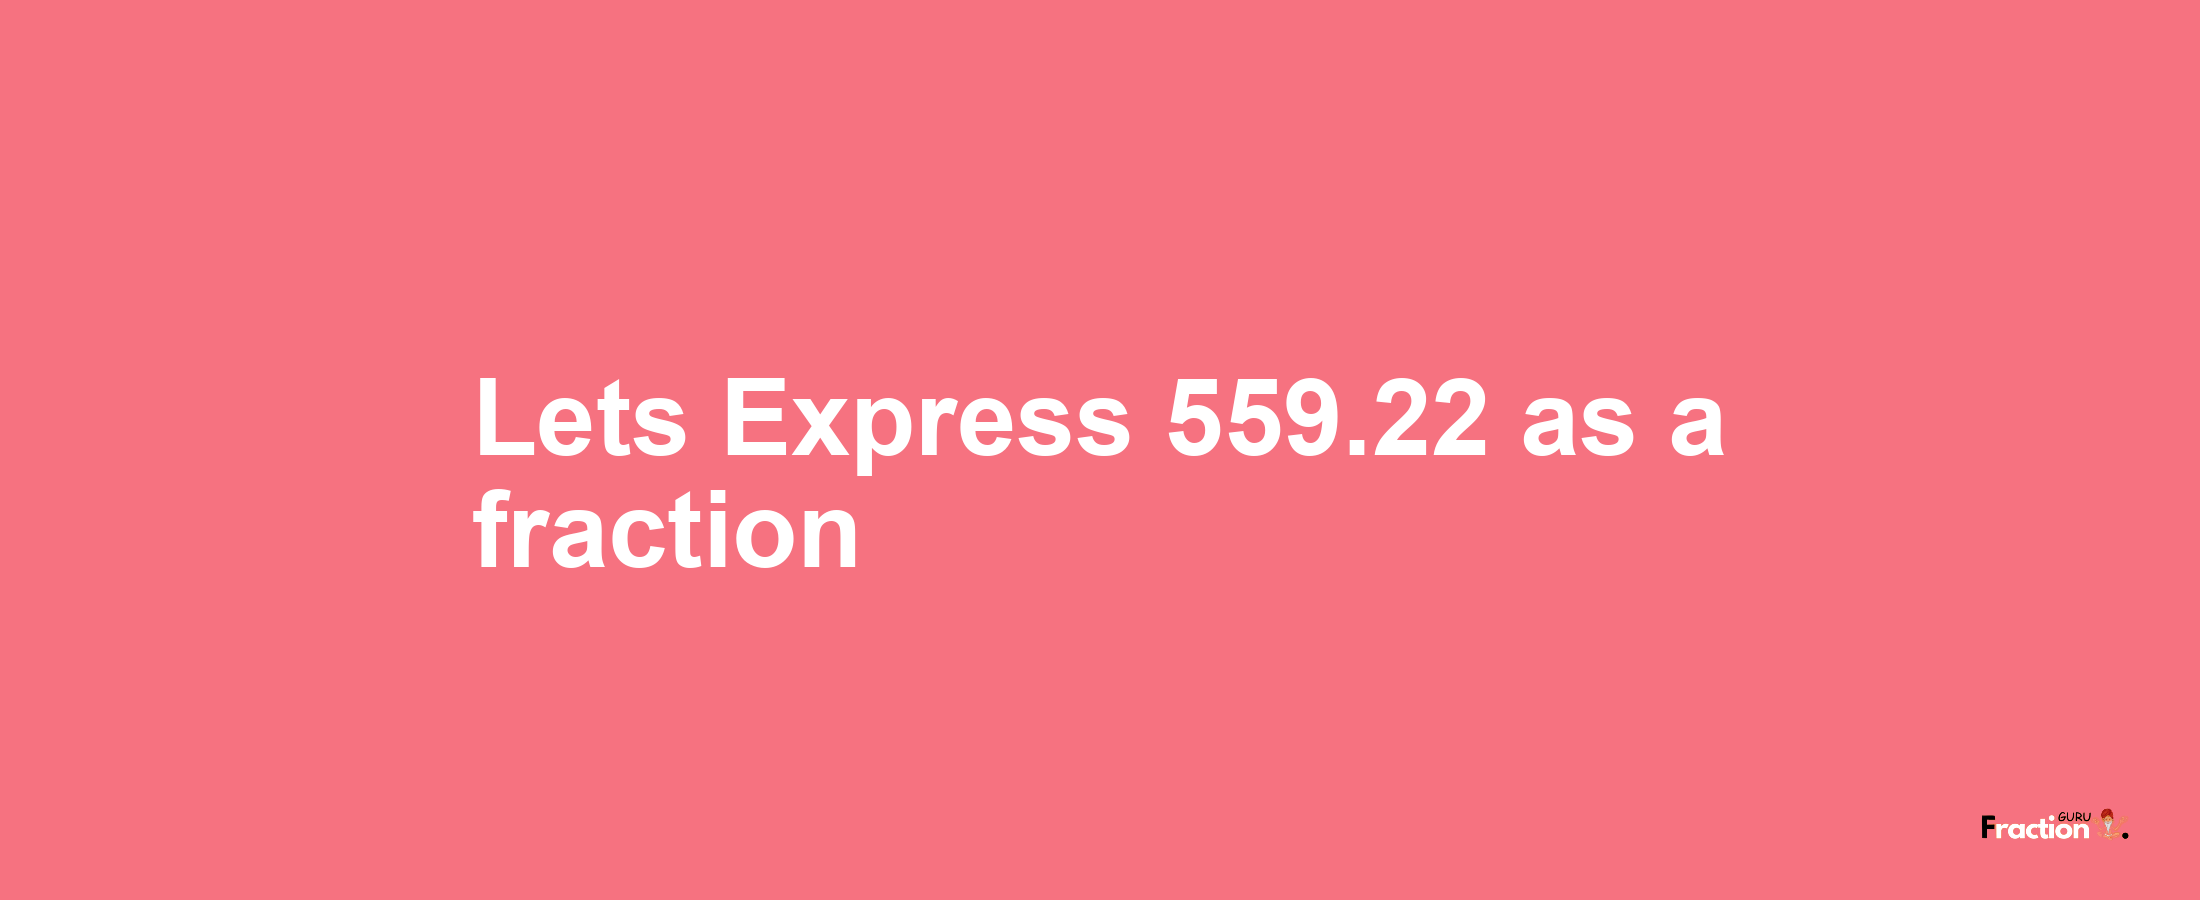 Lets Express 559.22 as afraction